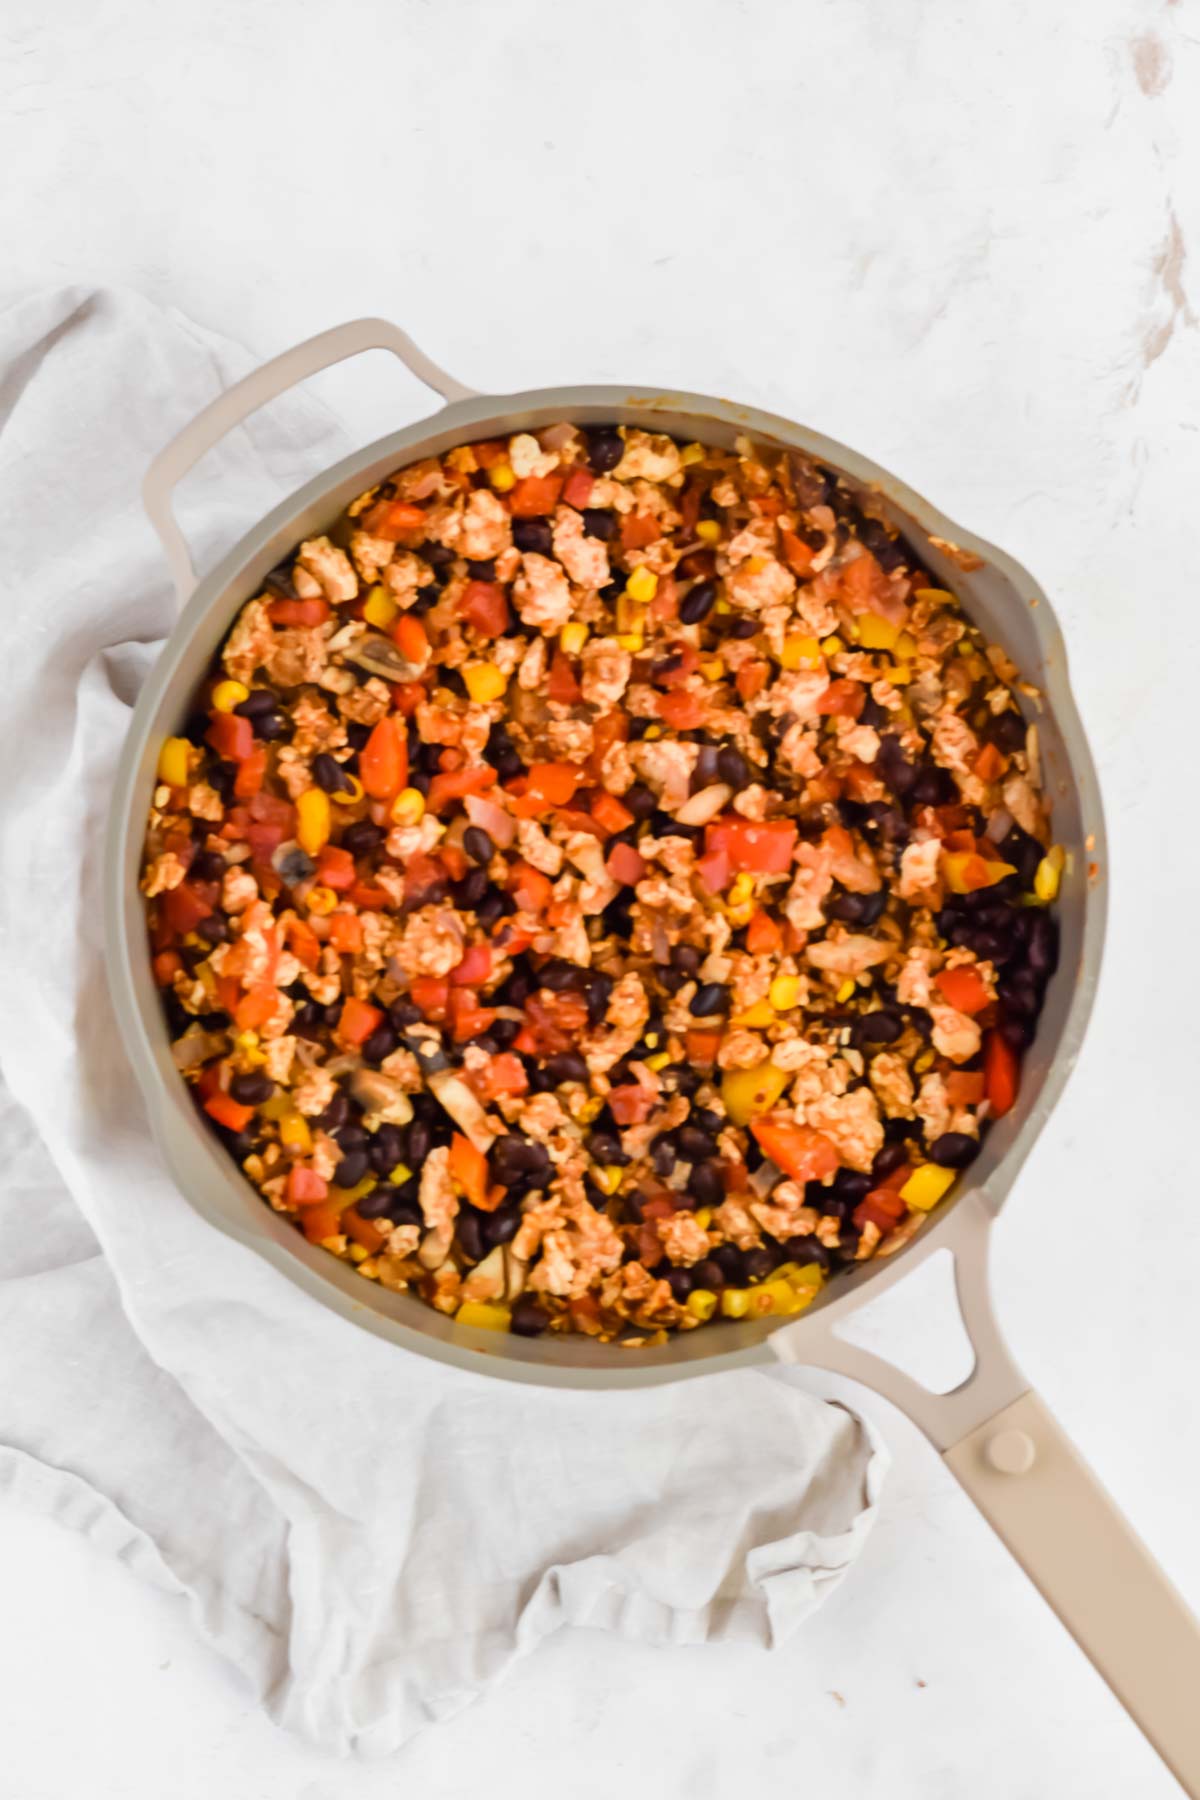 Ground chicken, black beans, bell peppers, and corn in a grey skillet.